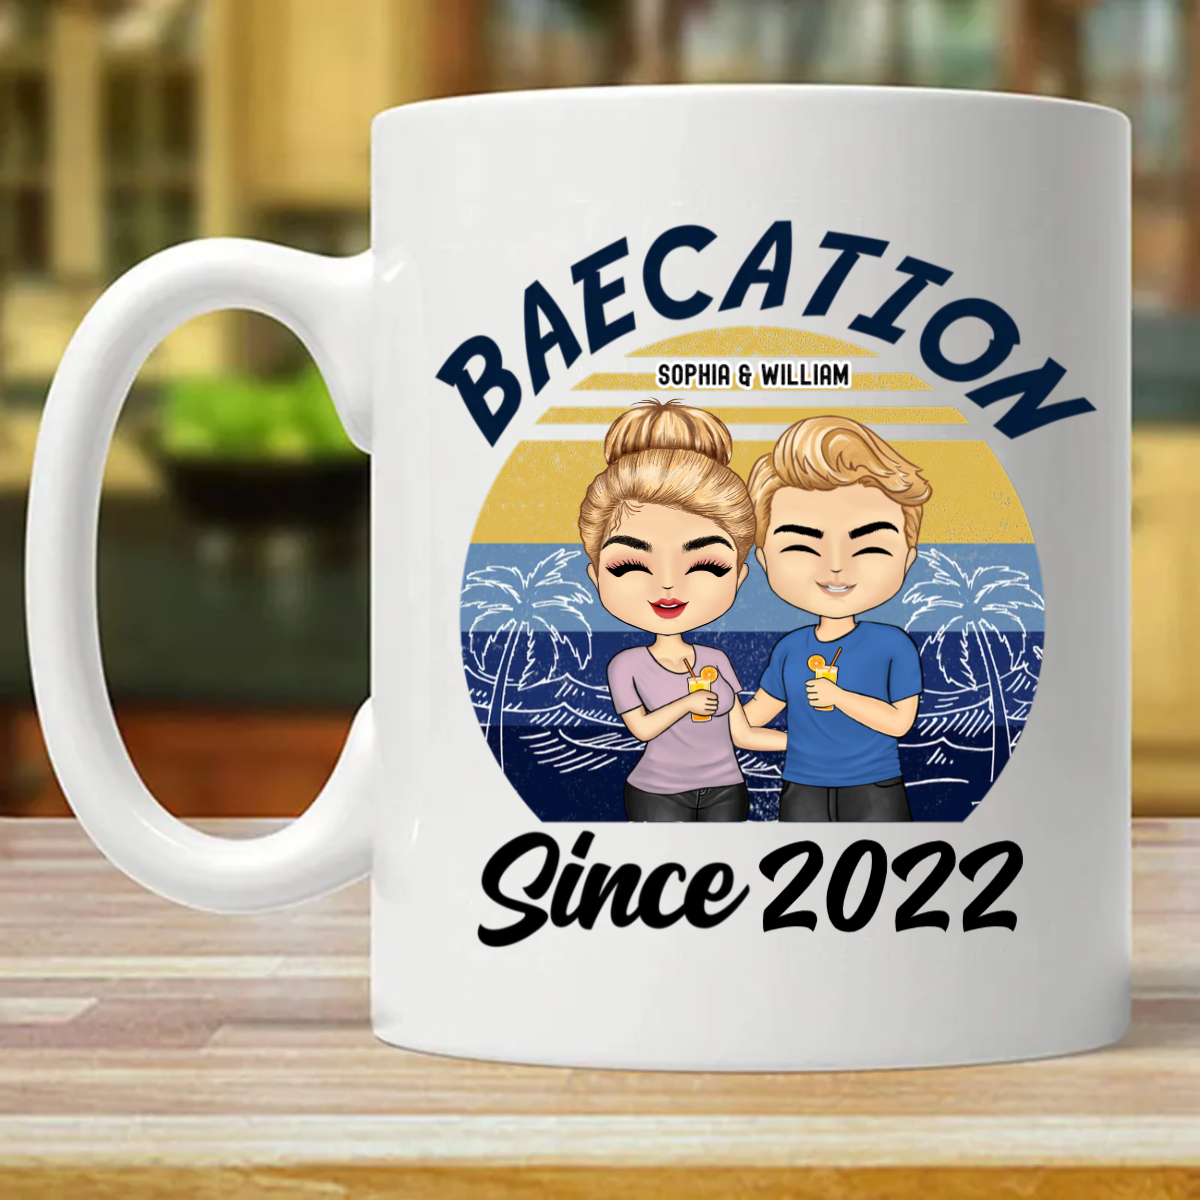 Baecation - Gift For Beach Couple - Personalized Custom Mug (Double-sided Printing)